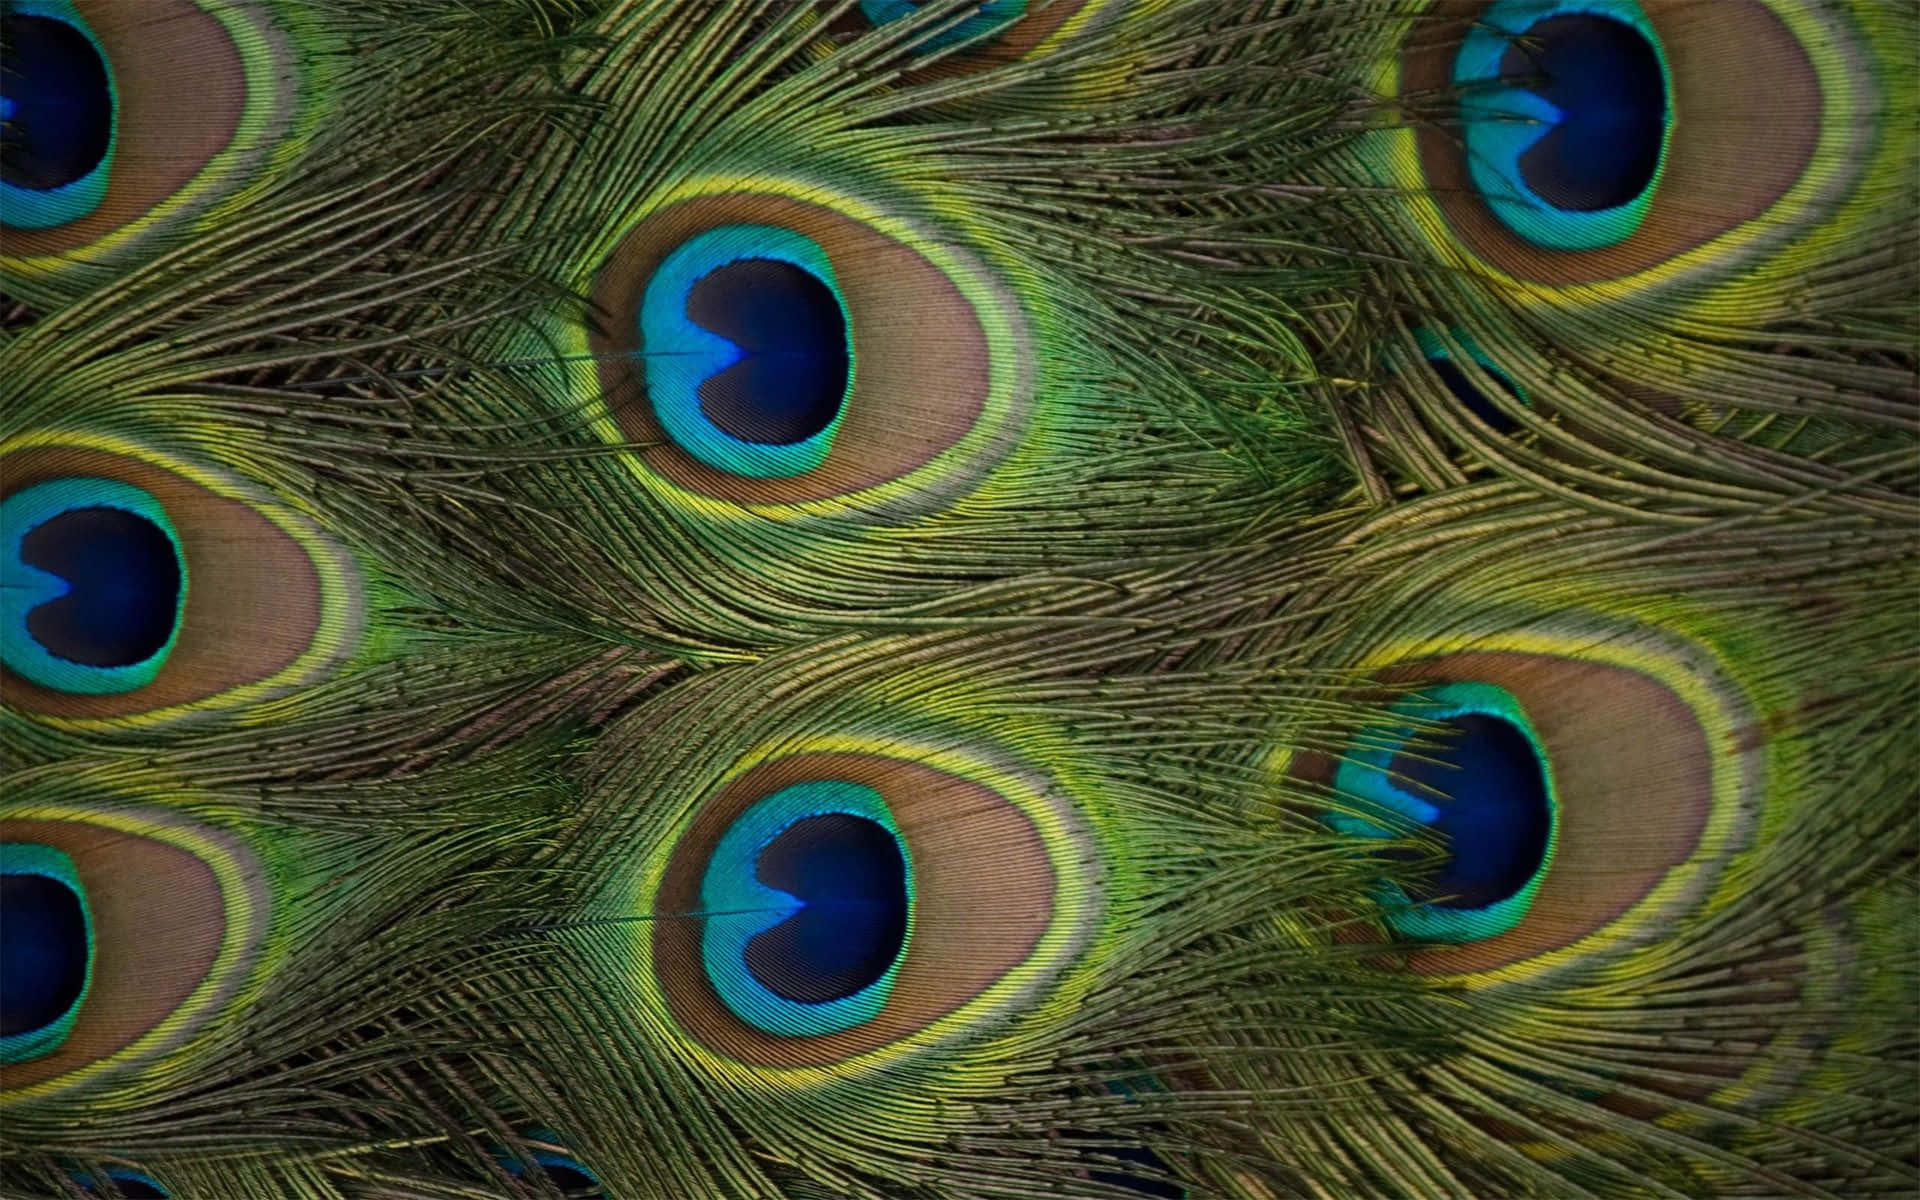 A vibrant peacock proudly displaying its feathers